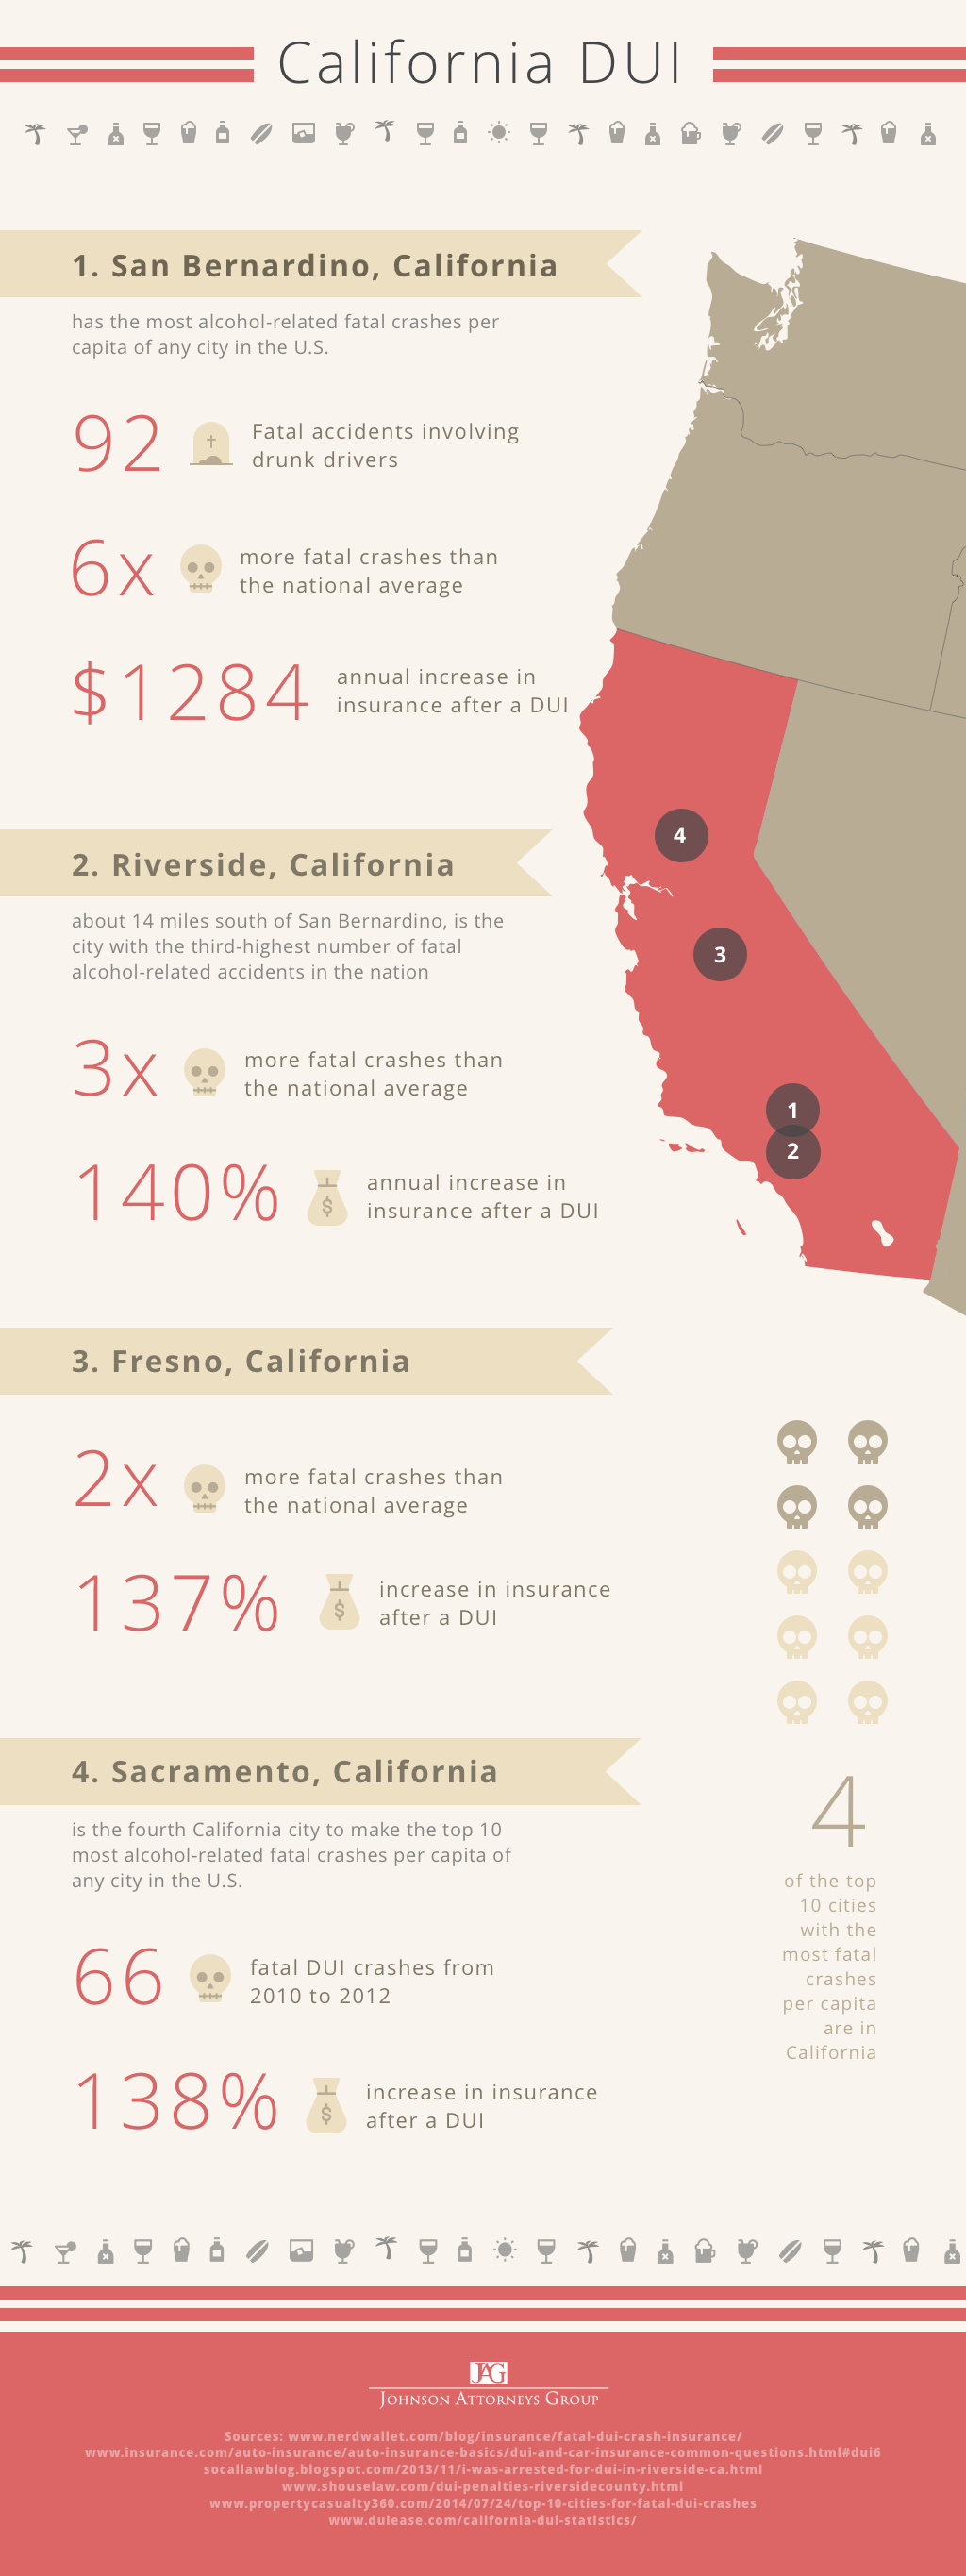 California DUI Statistics Infographic 4 California Cities with the